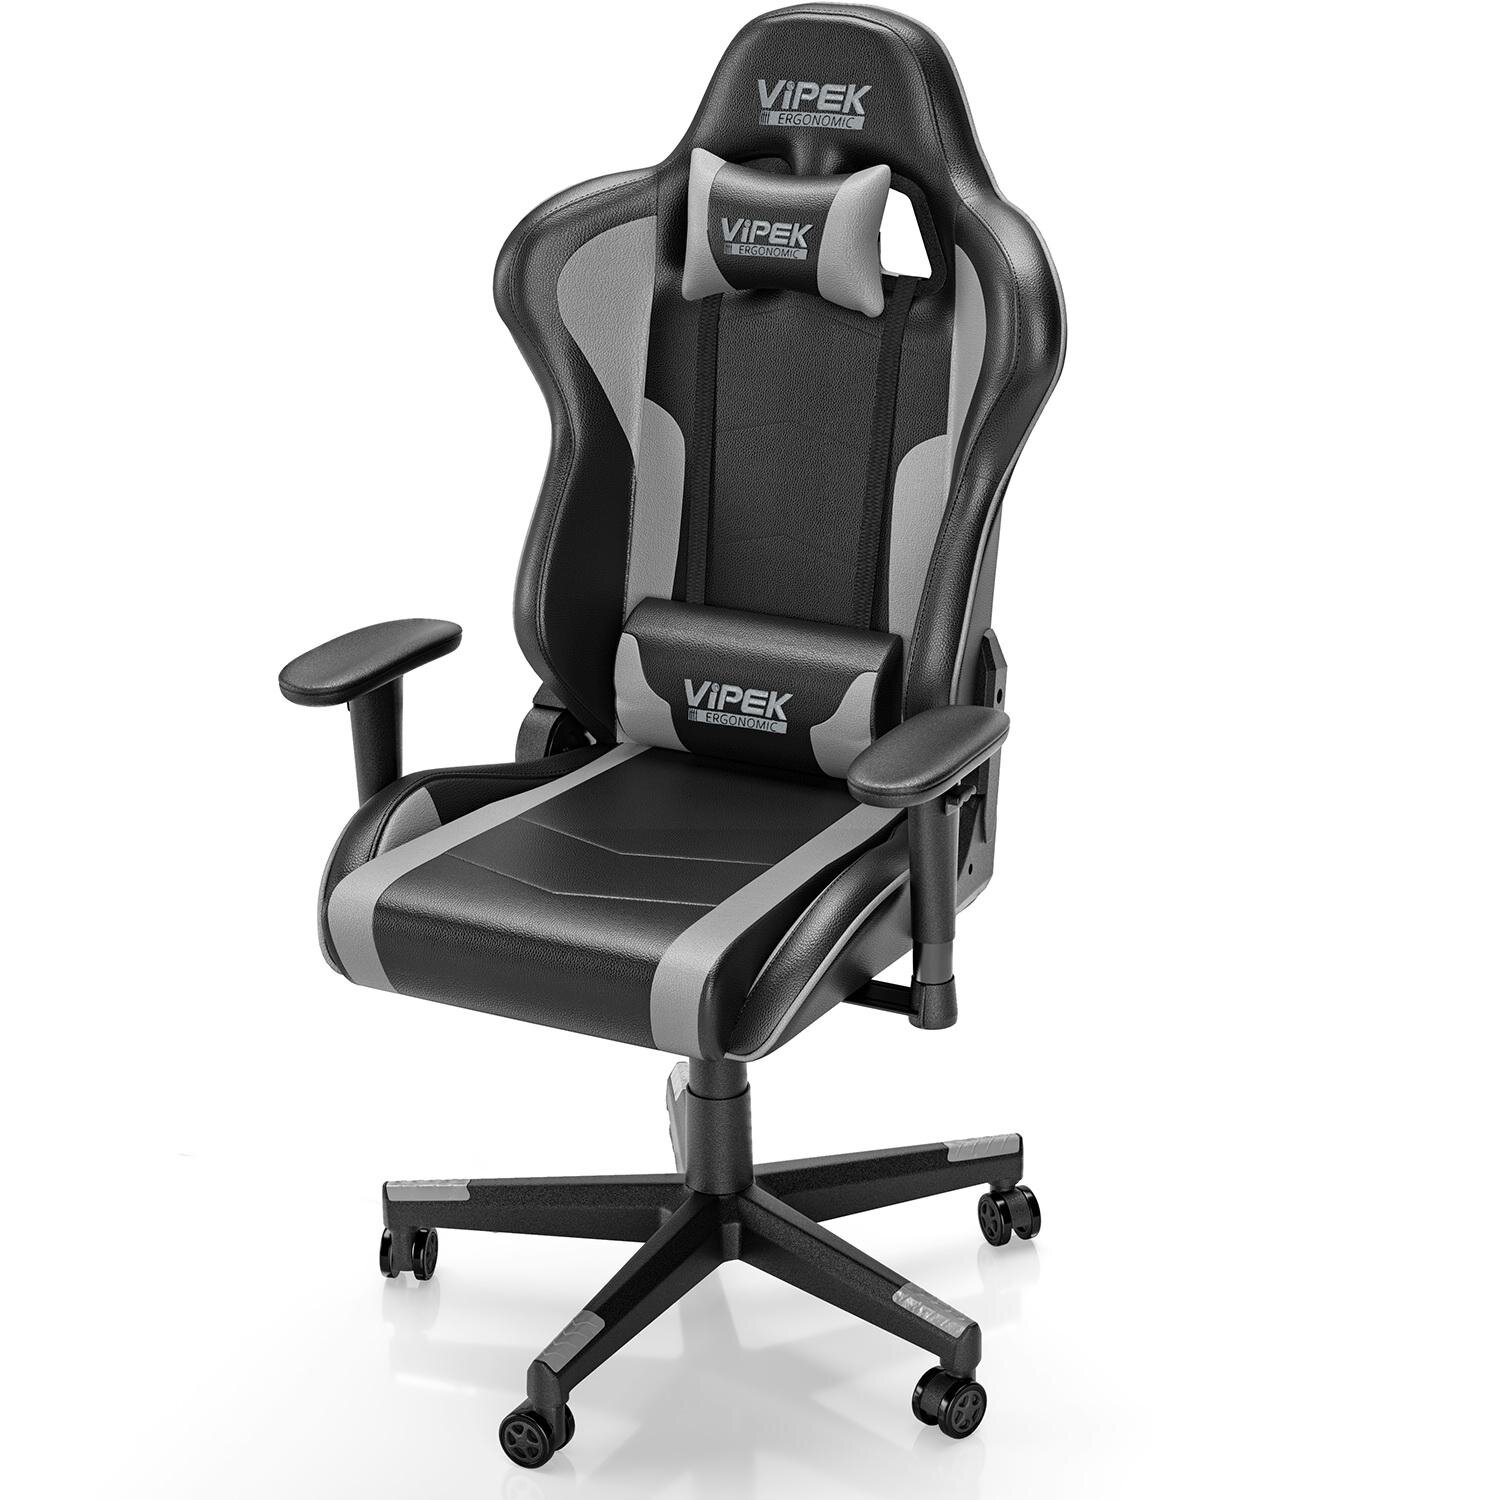 GTXMAN Gaming Office Chair Premium PU Leather Racing Executive Video Game Chair Multi-Function Ergonomic Computer Desk Chair GT008